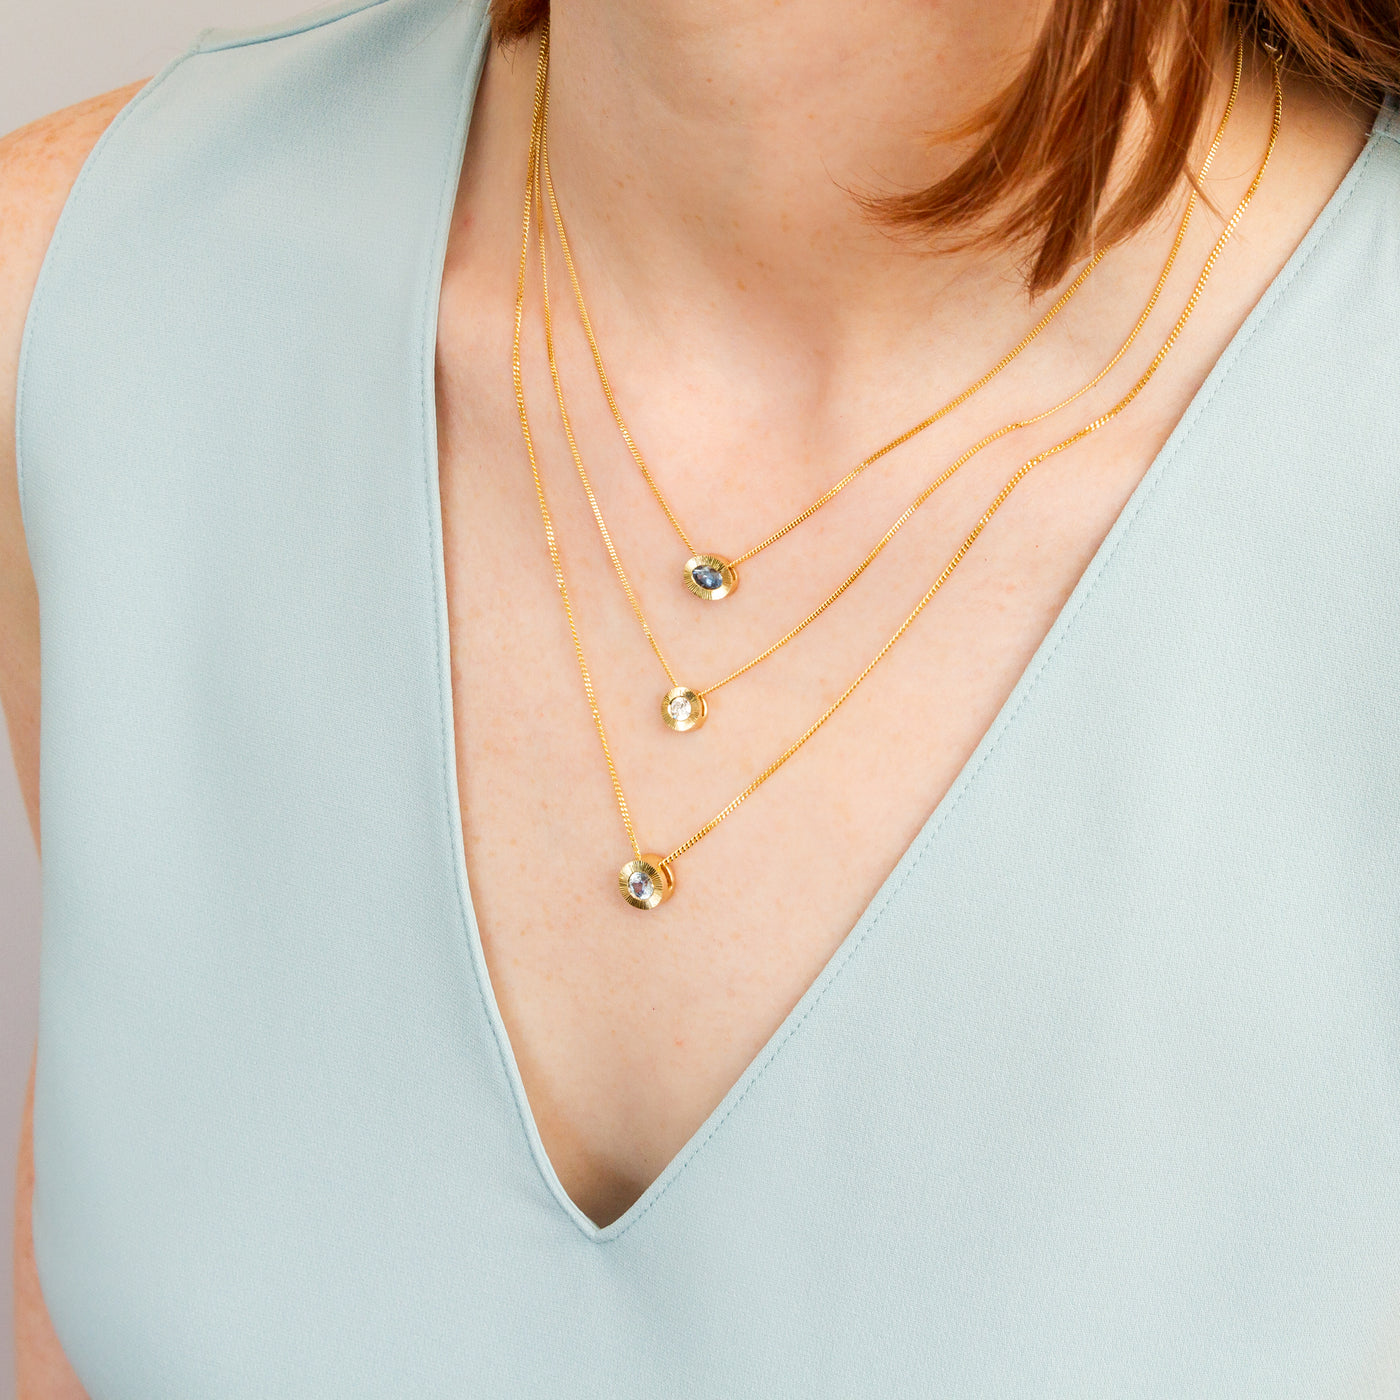 Old European Cut Diamond Medium Aurora Necklace In Yellow Gold on a model, styled shot 3